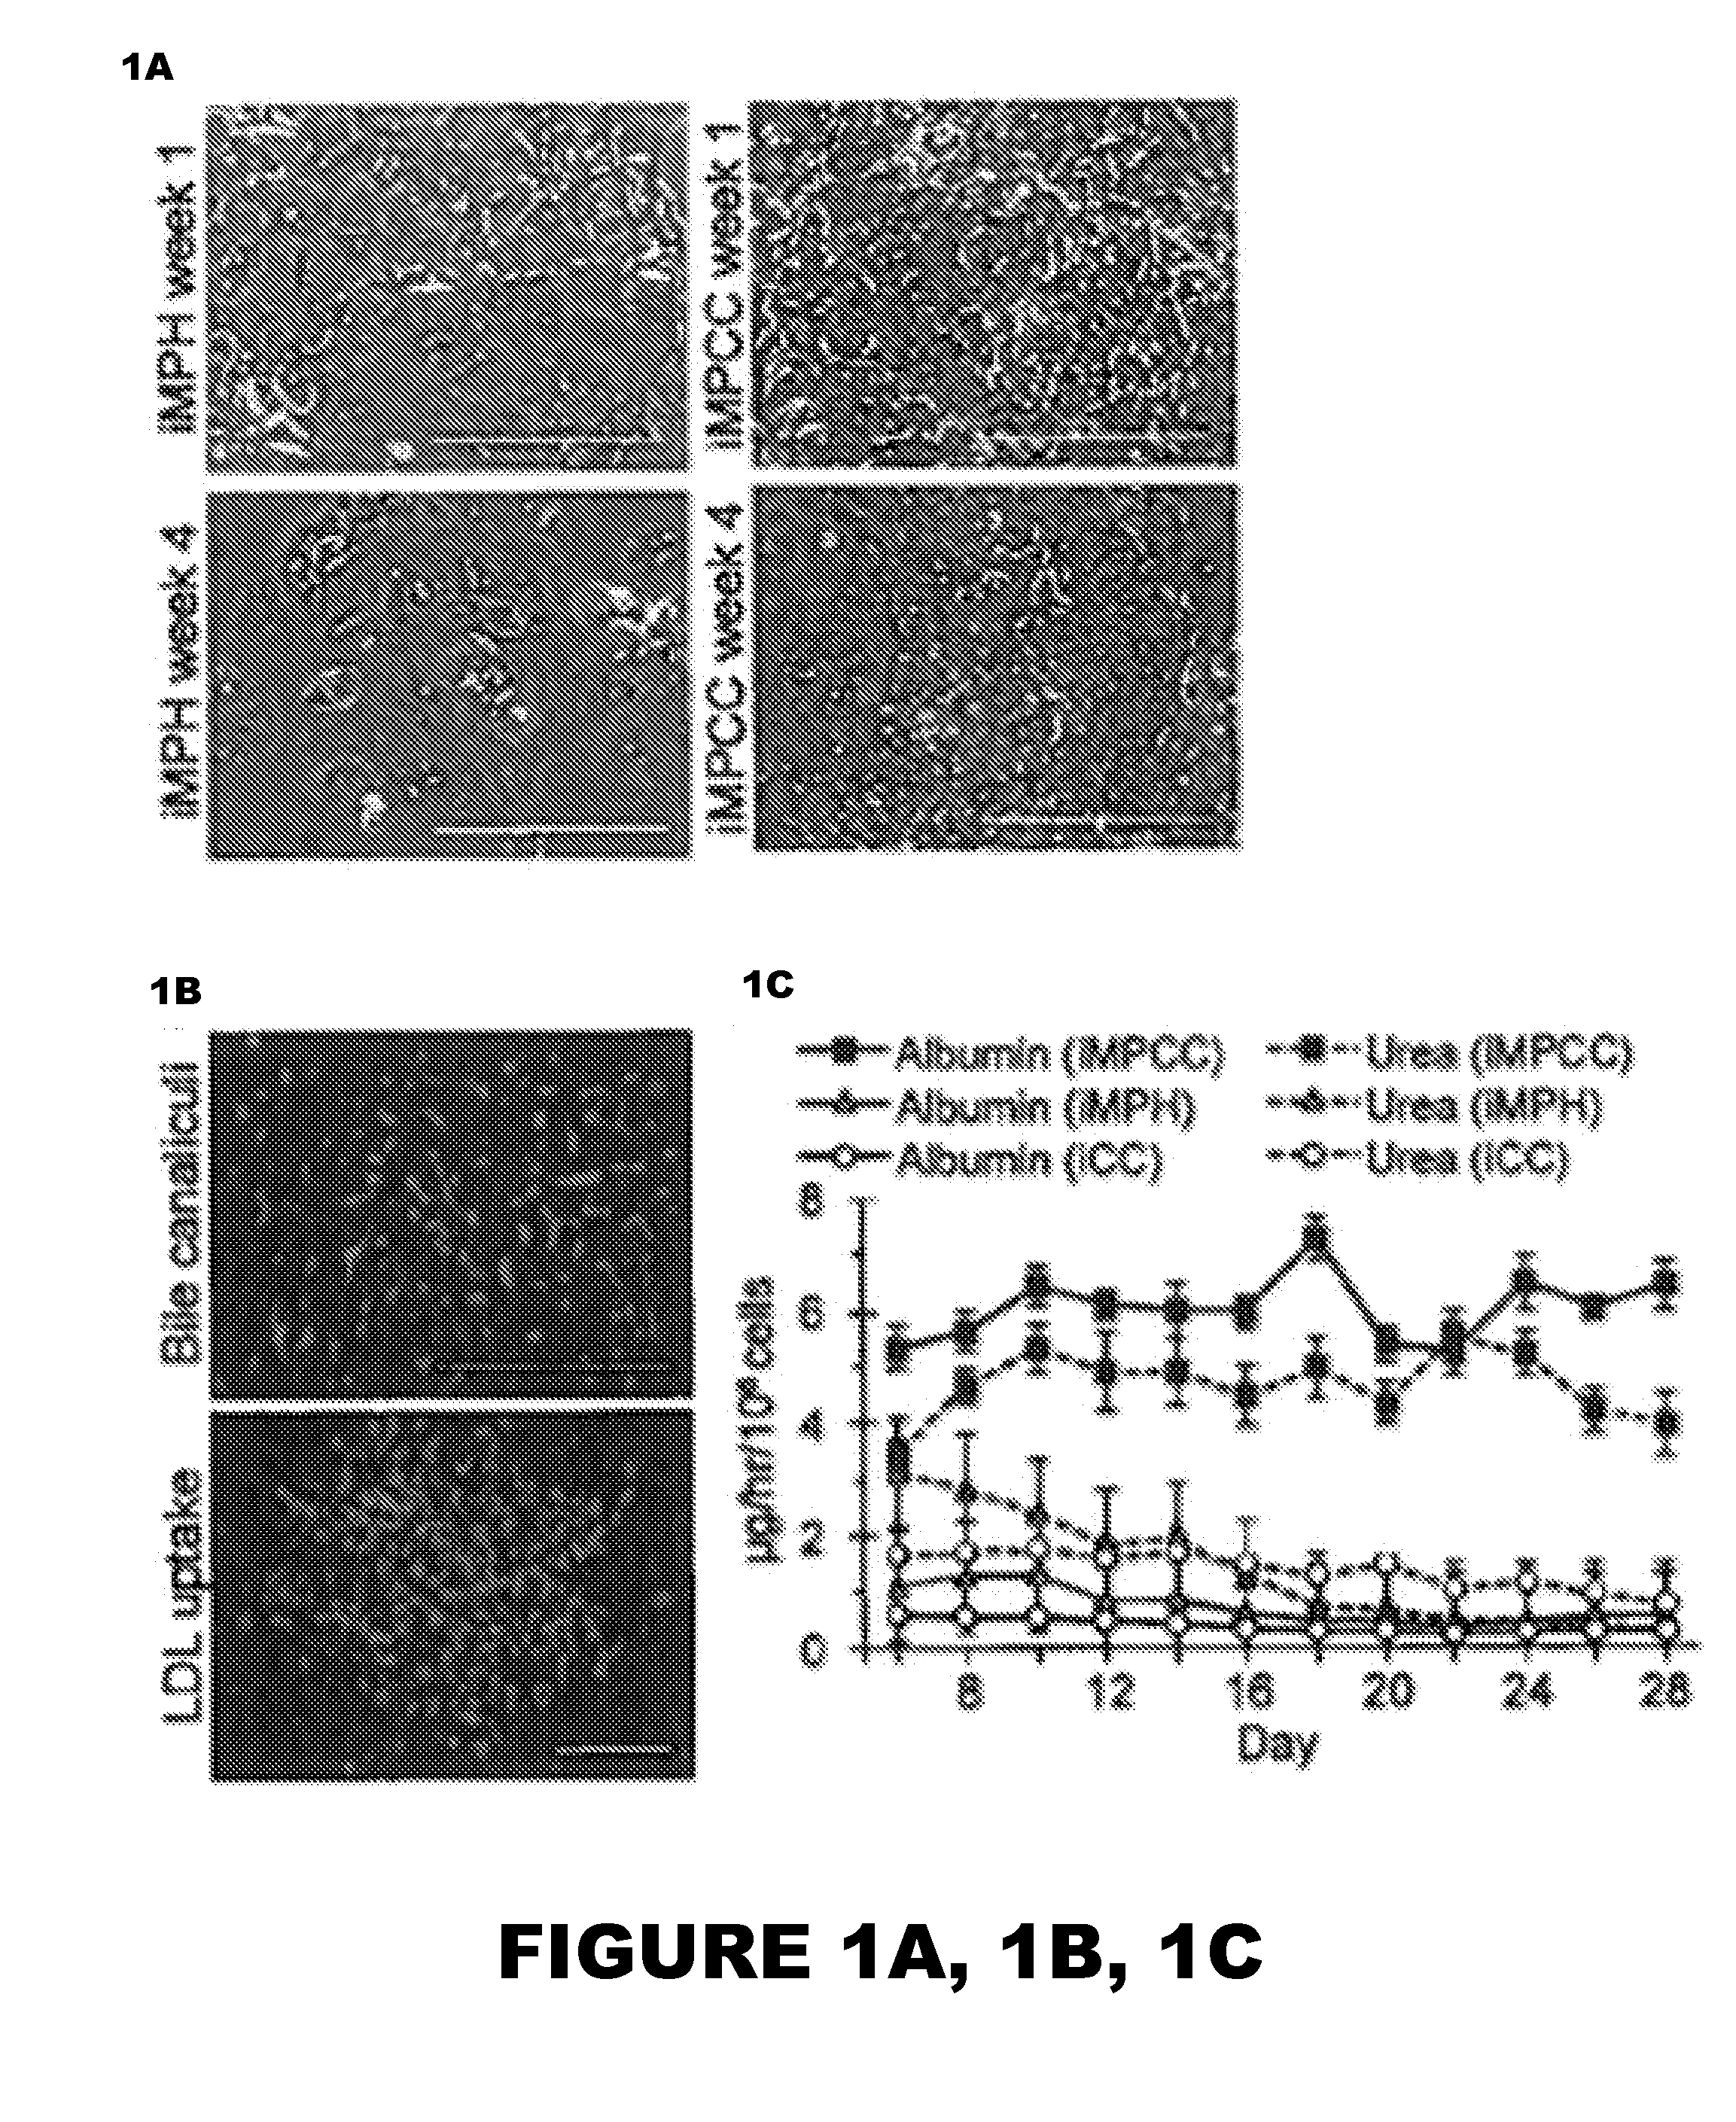 Stem cell-derived hepatocytes in co-culture and uses thereof